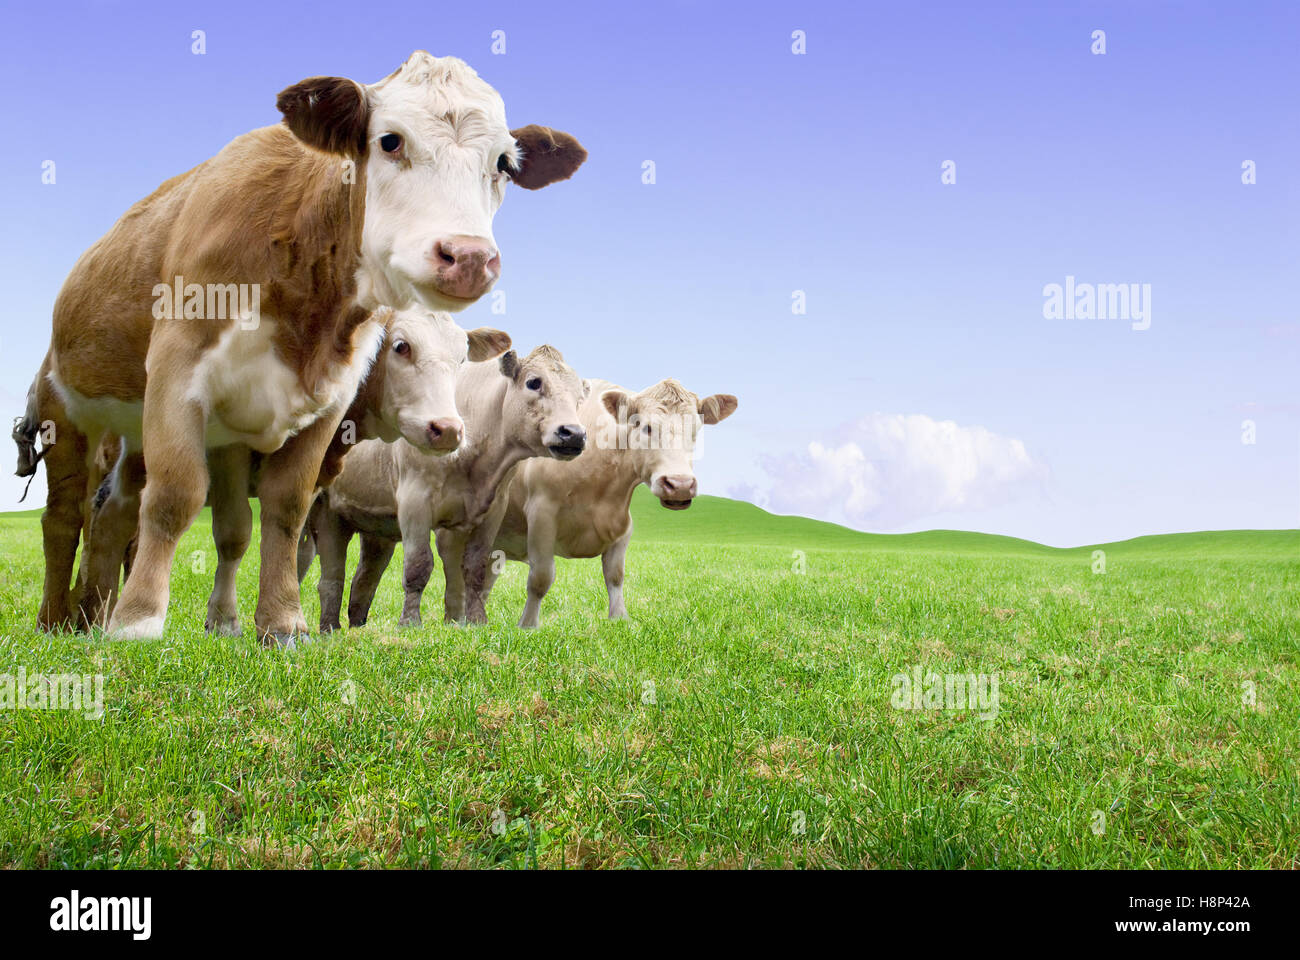 Jersey Bullocks in a green pasture. This image is a composite. Stock Photo